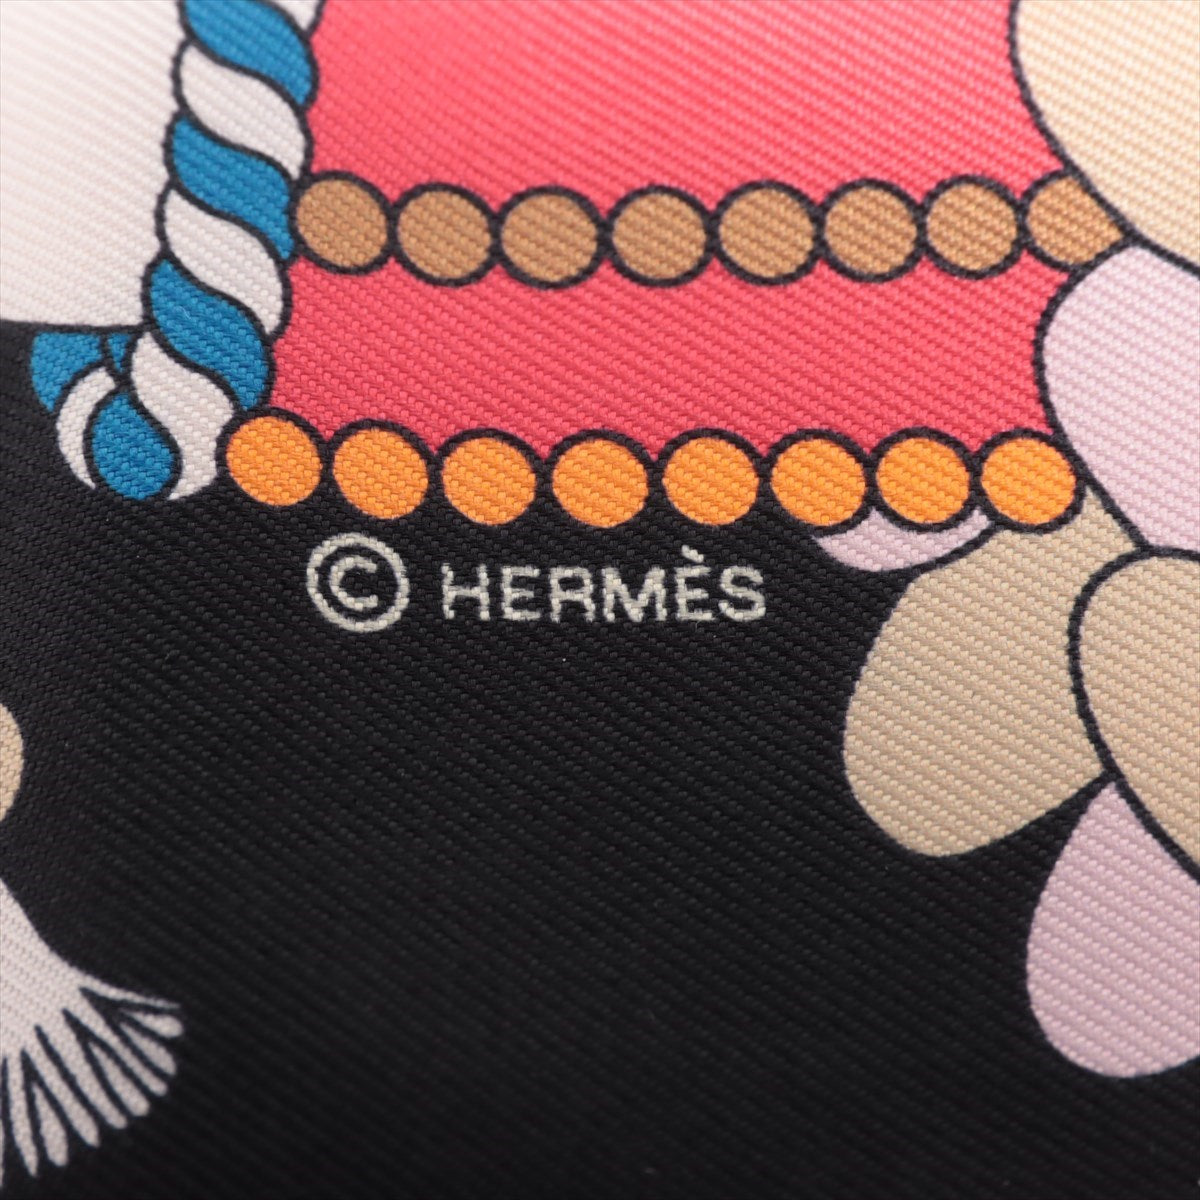 Hermès Twilly La Patisserie Francaise Patisserie française Scarf Silk With charms